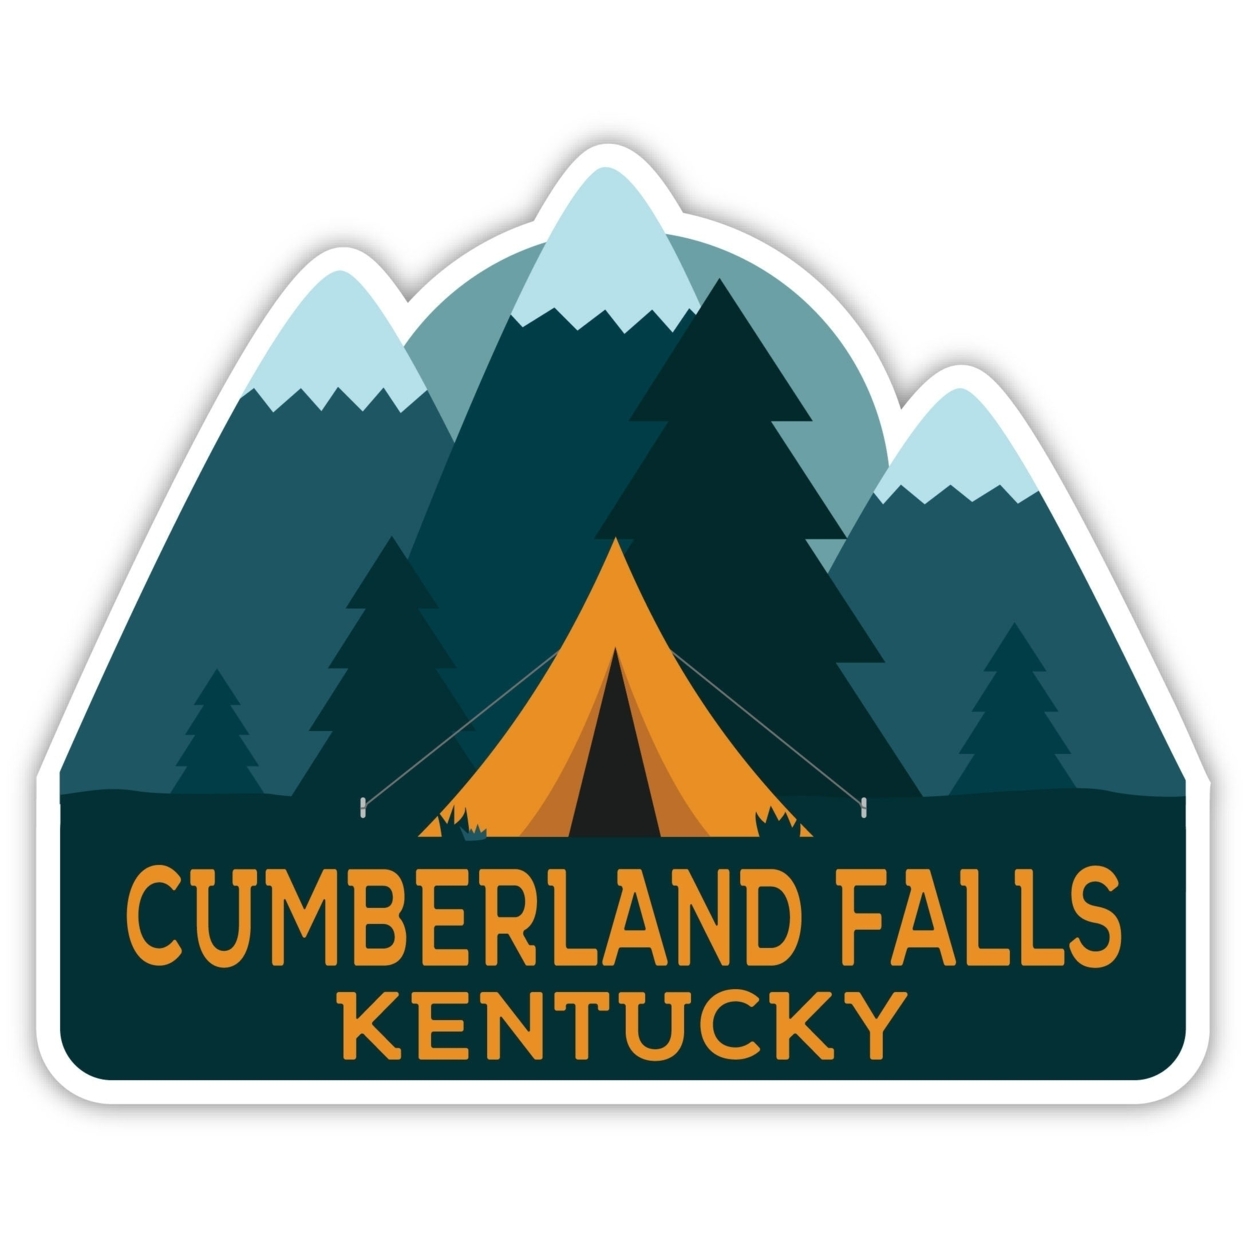 Cumberland Falls Kentucky Souvenir Decorative Stickers (Choose Theme And Size) - 4-Pack, 12-Inch, Tent